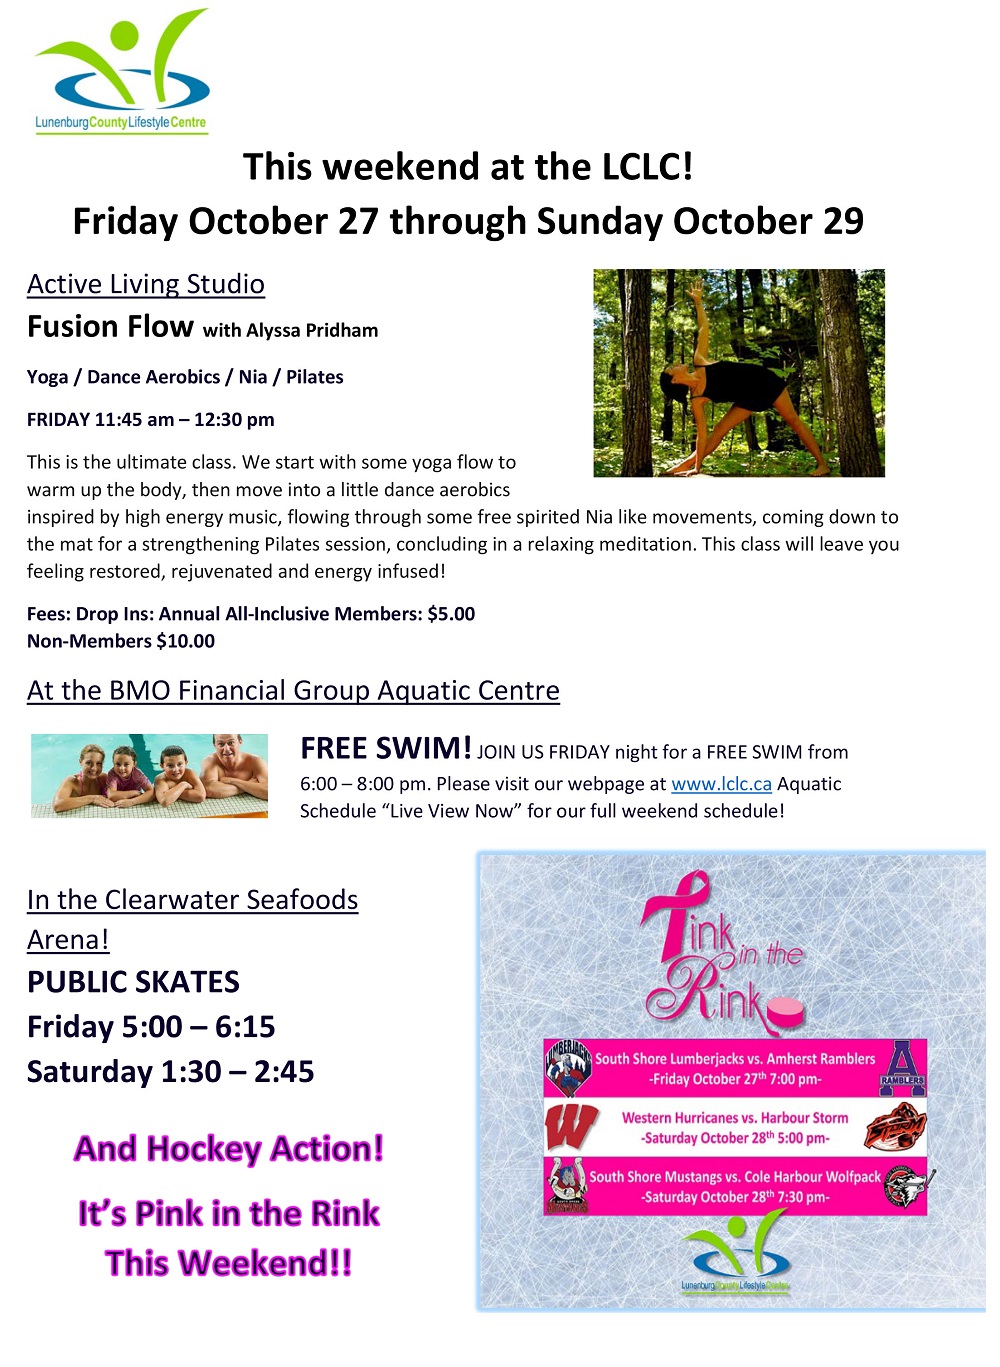 This weekend at the LCLC Oct 27 29 WEB